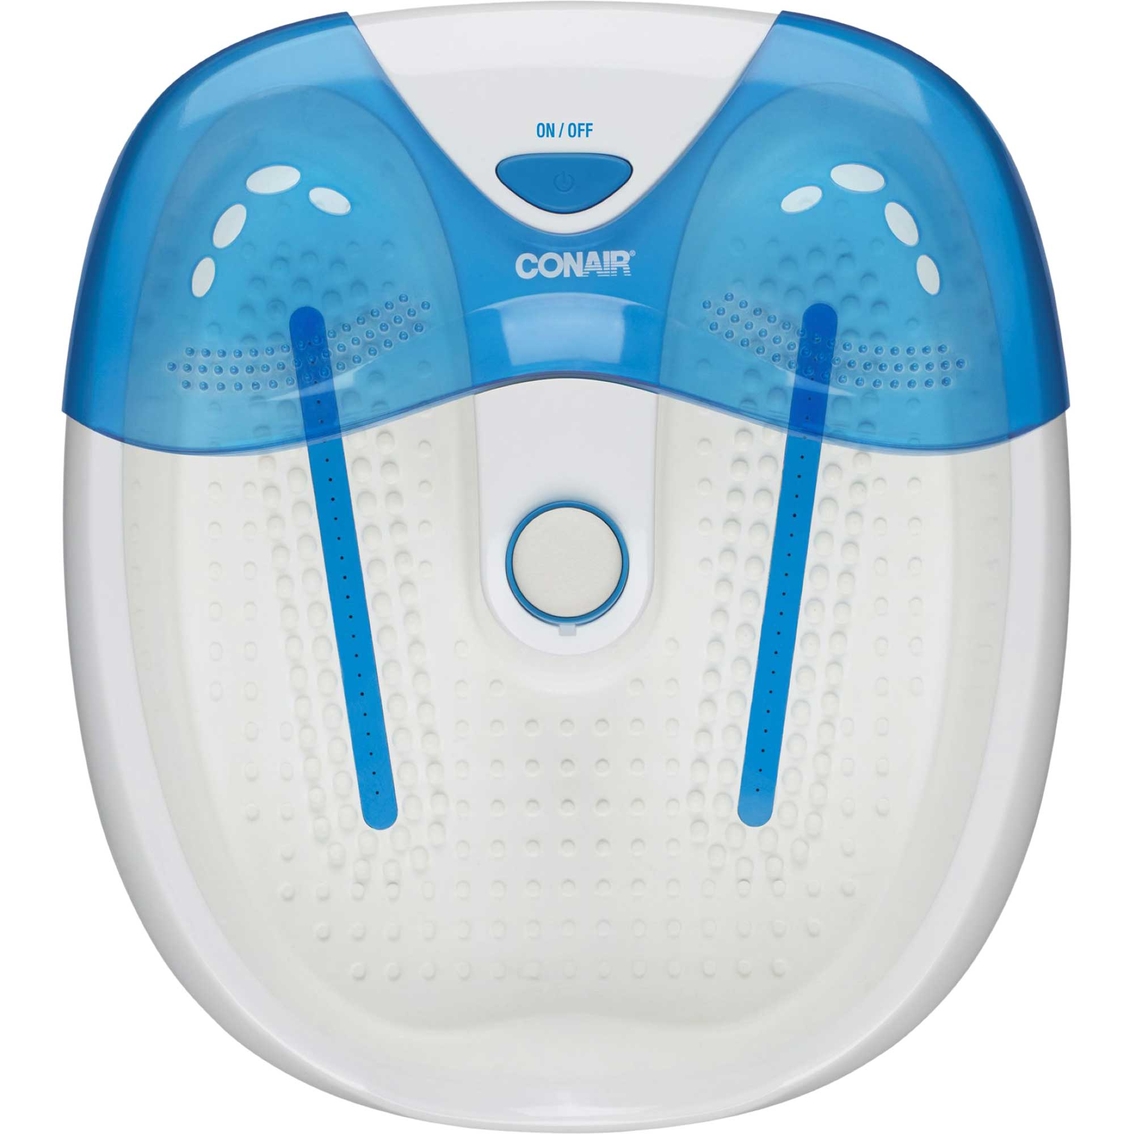 Conair Foot Bath with Heat and Vibration - Image 3 of 7